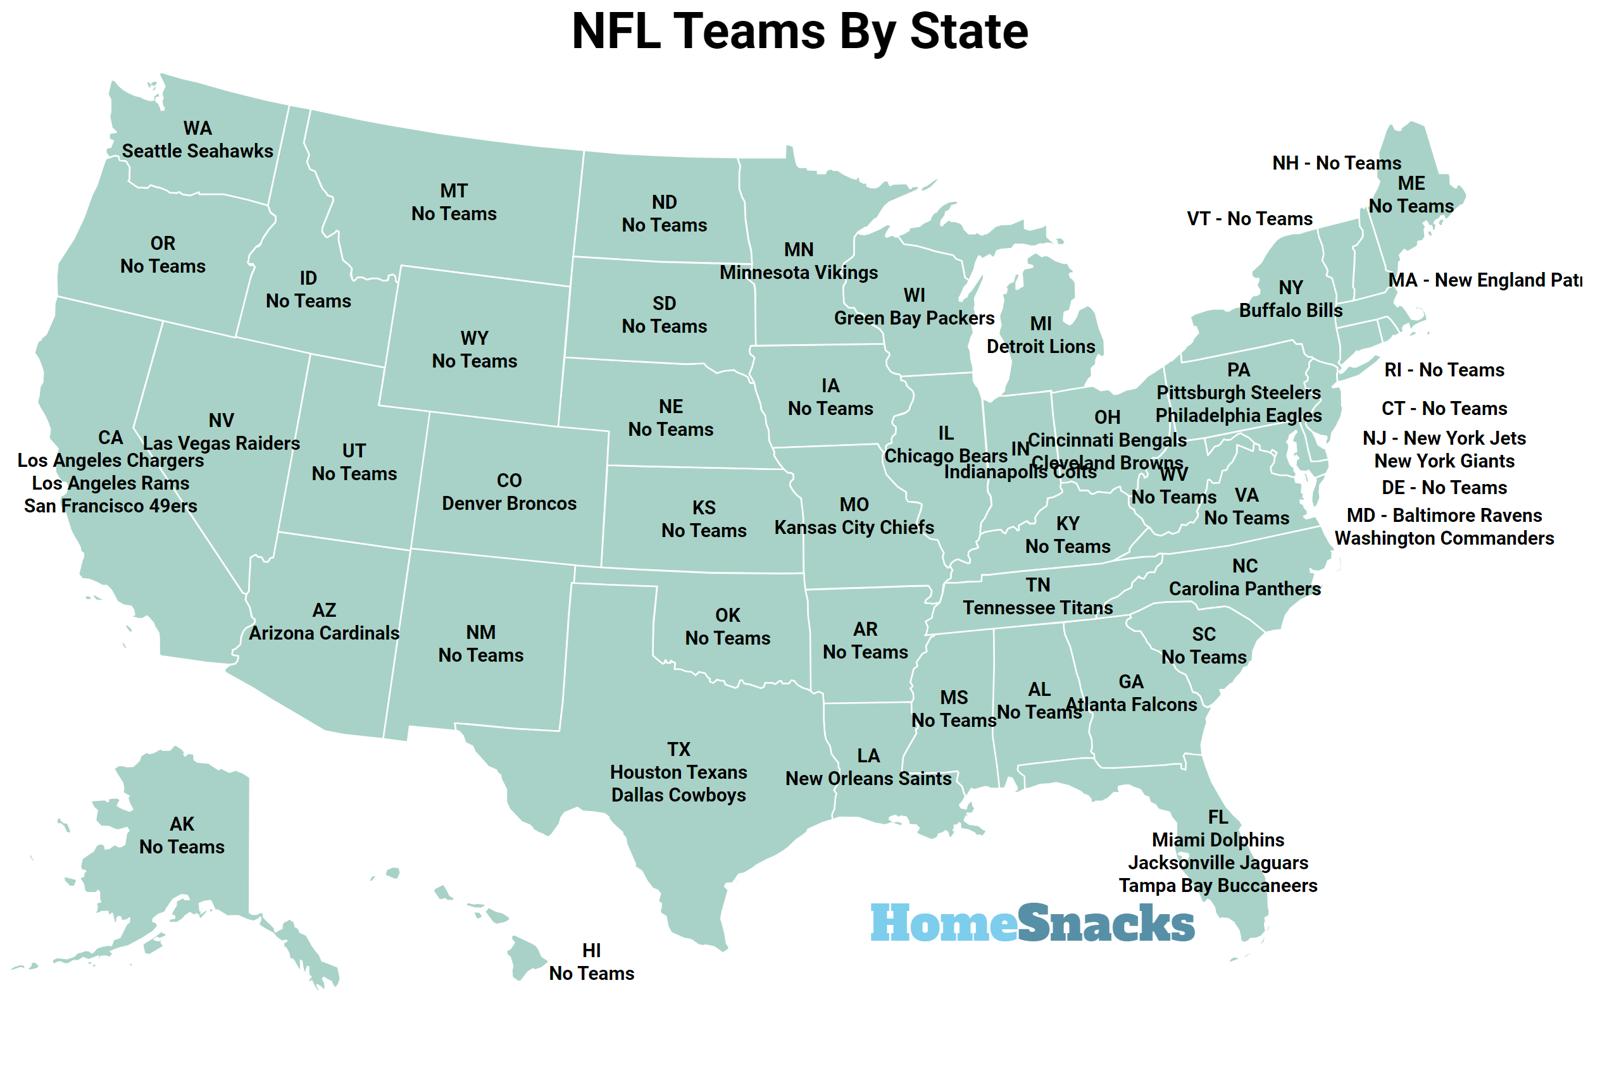 NFL Team Names By State